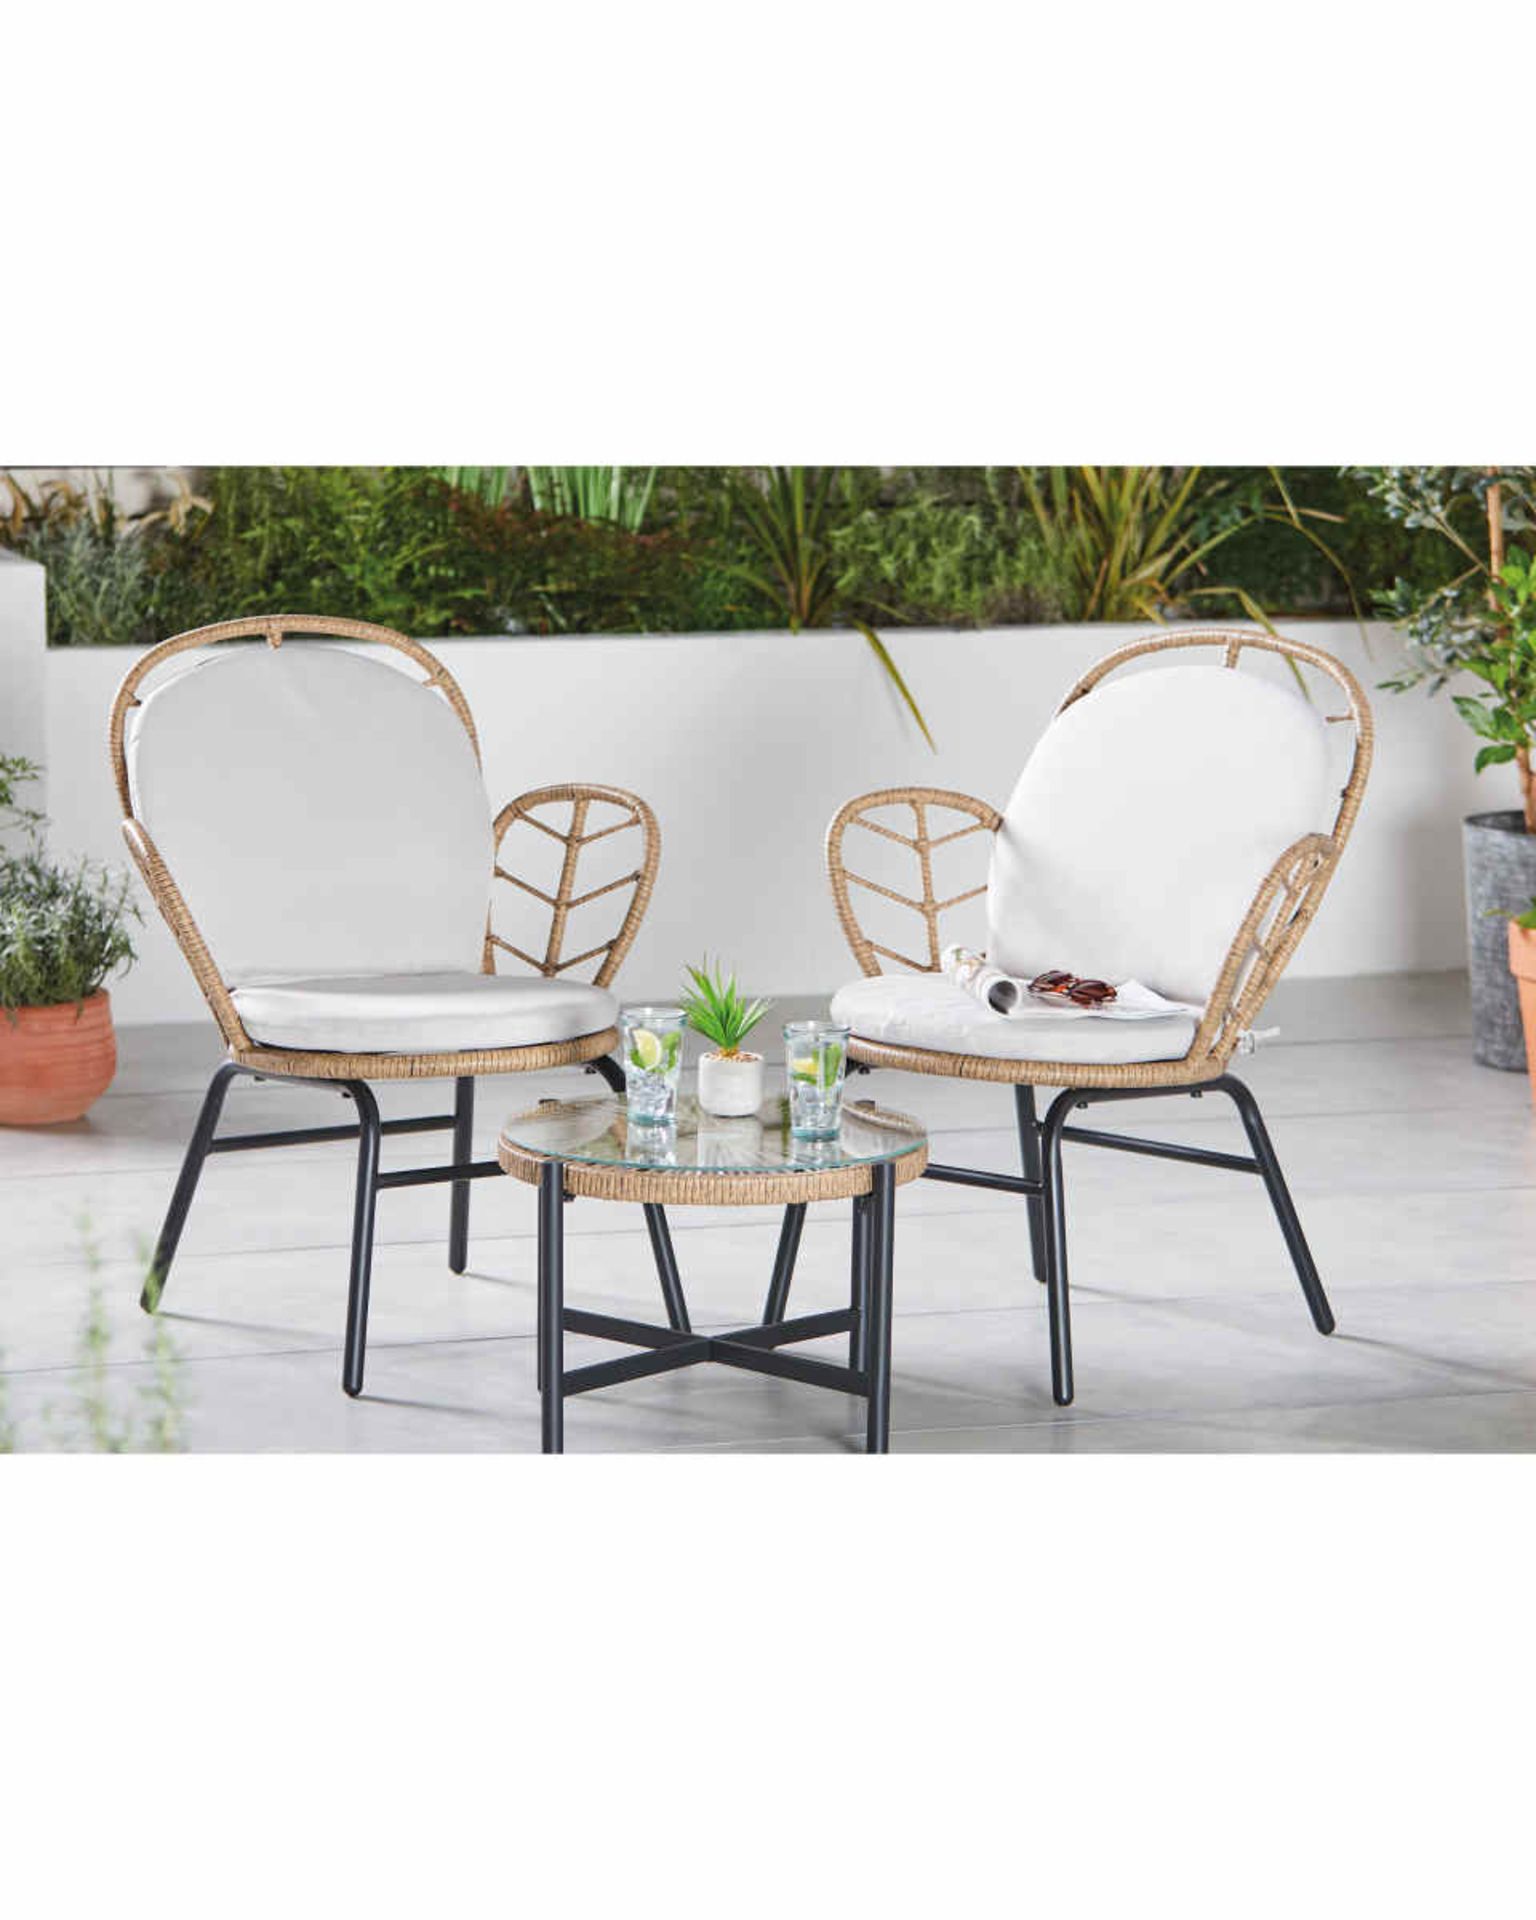 Luxury Petal Rattan Bistro Set. Transform your garden and create a space where you can relax with - Image 3 of 3